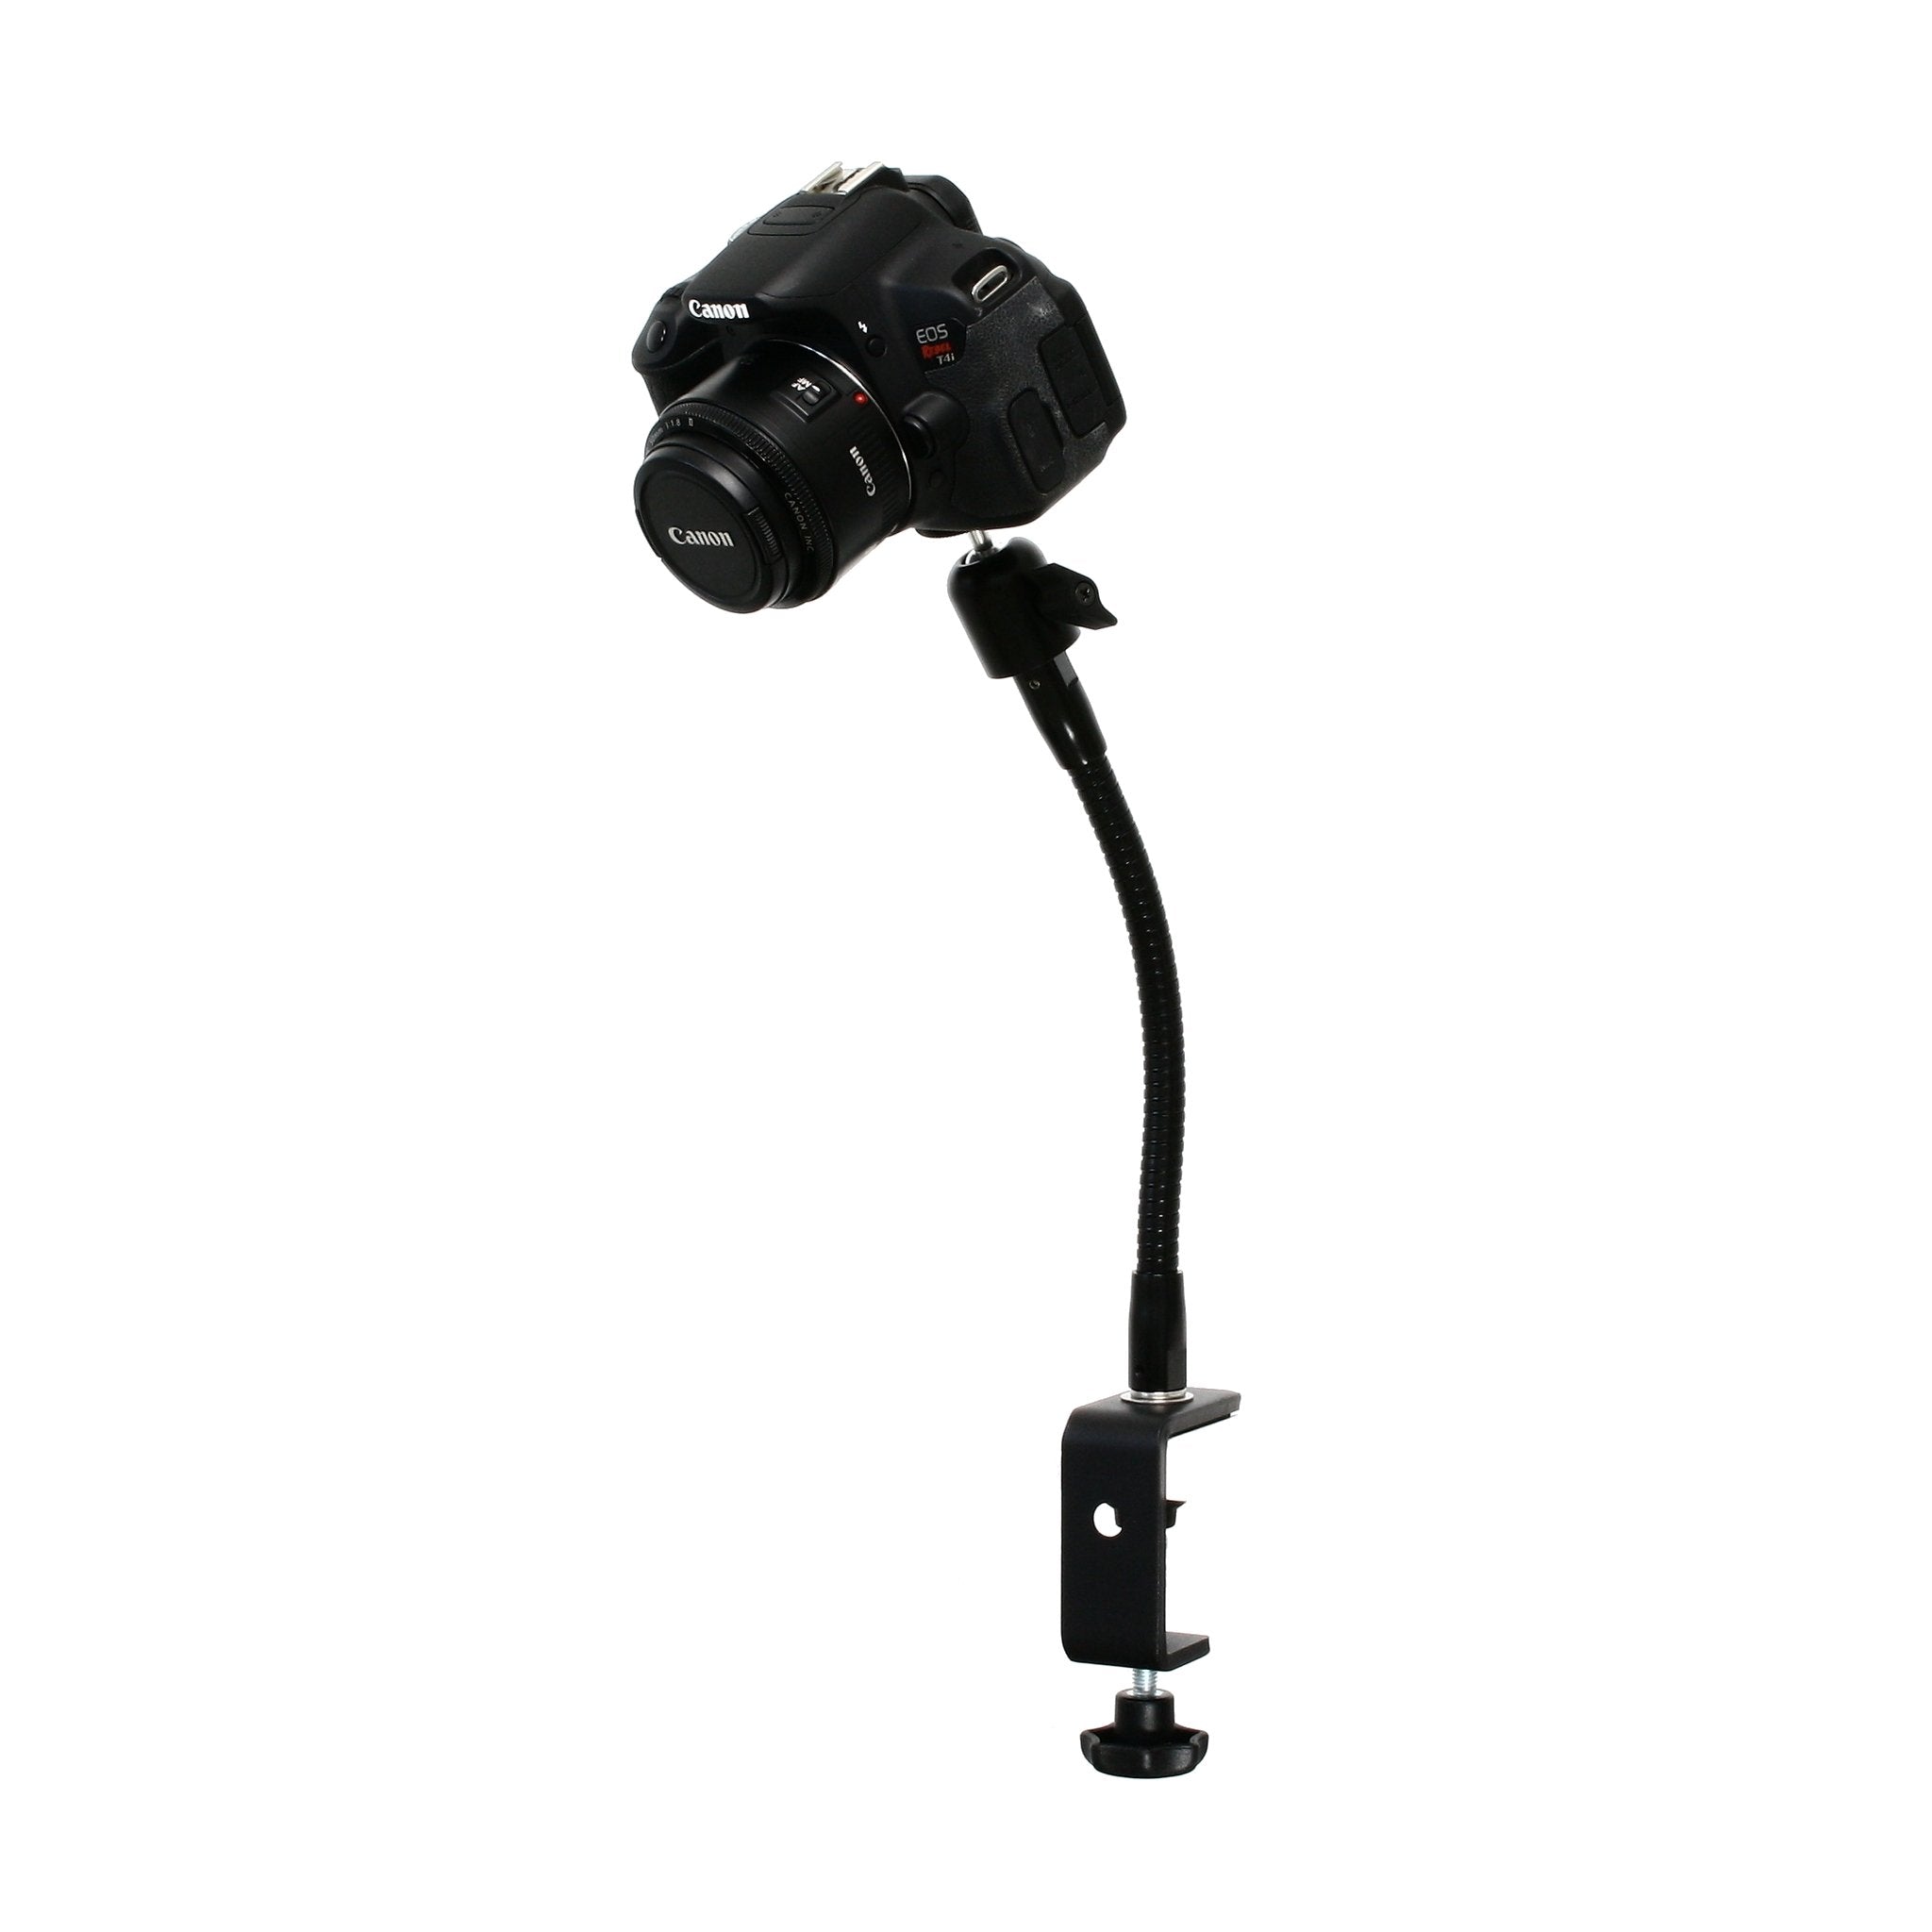 SnakeClamp 9 Black Flexible Arm Camera Stand with Table Clamp